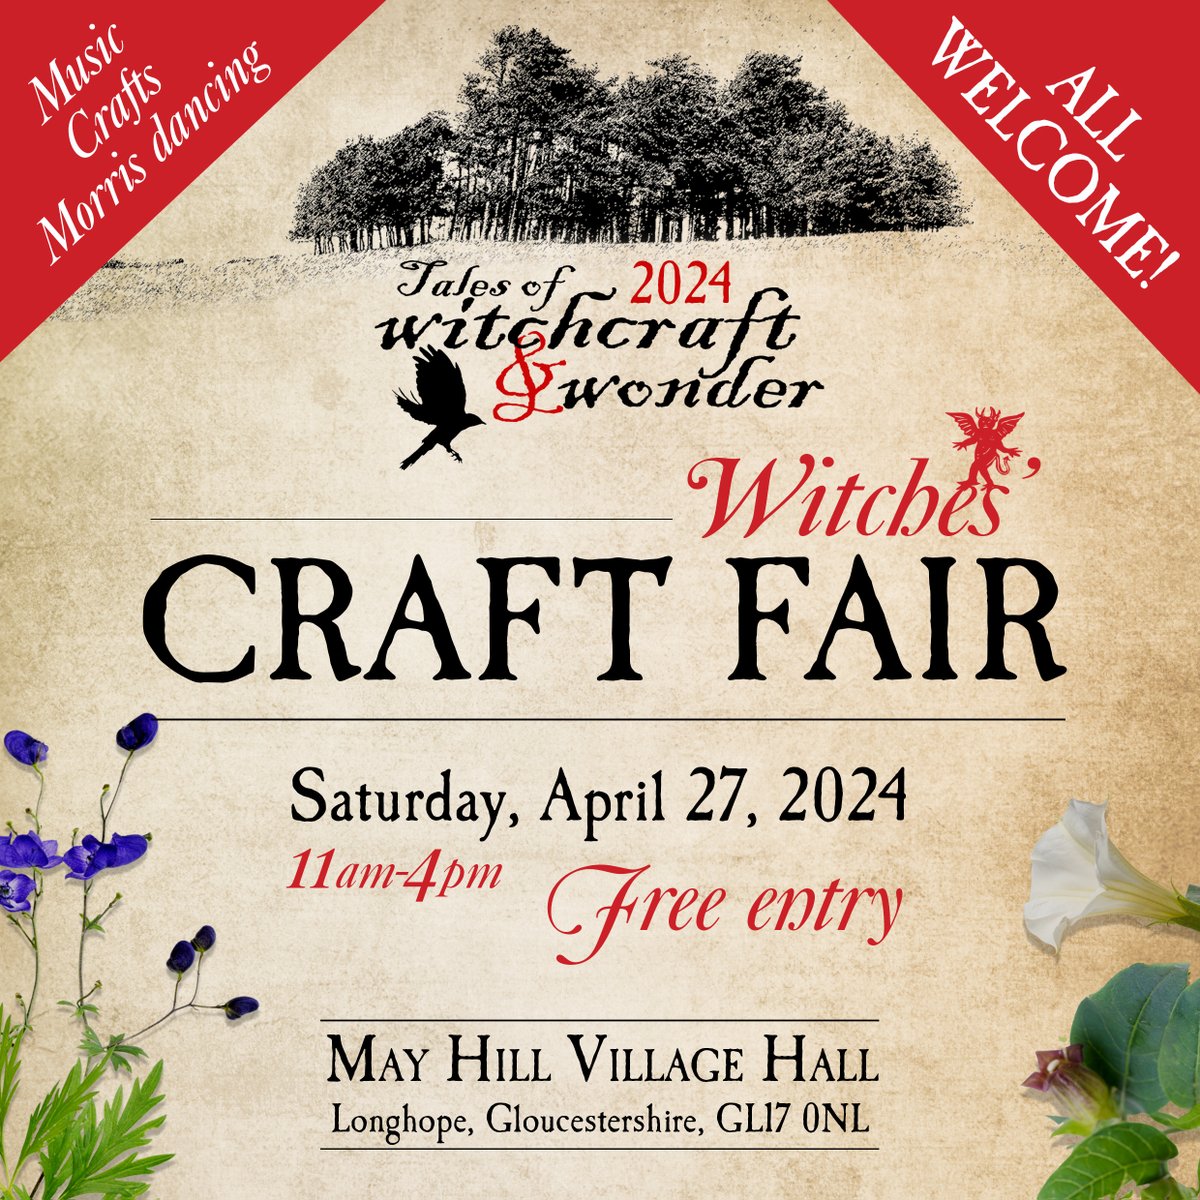 Coming to May Hill VH on Sat, April 27, our Witches' Craft Fair, as part of the 'Tales of Witchcraft & Wonder' pre-Beltaine weekend on magical May Hill in Gloucestershire. It's free entry, with some talented makers & performers, so please help spread the word! Thank you. 🌳🌳🌳x